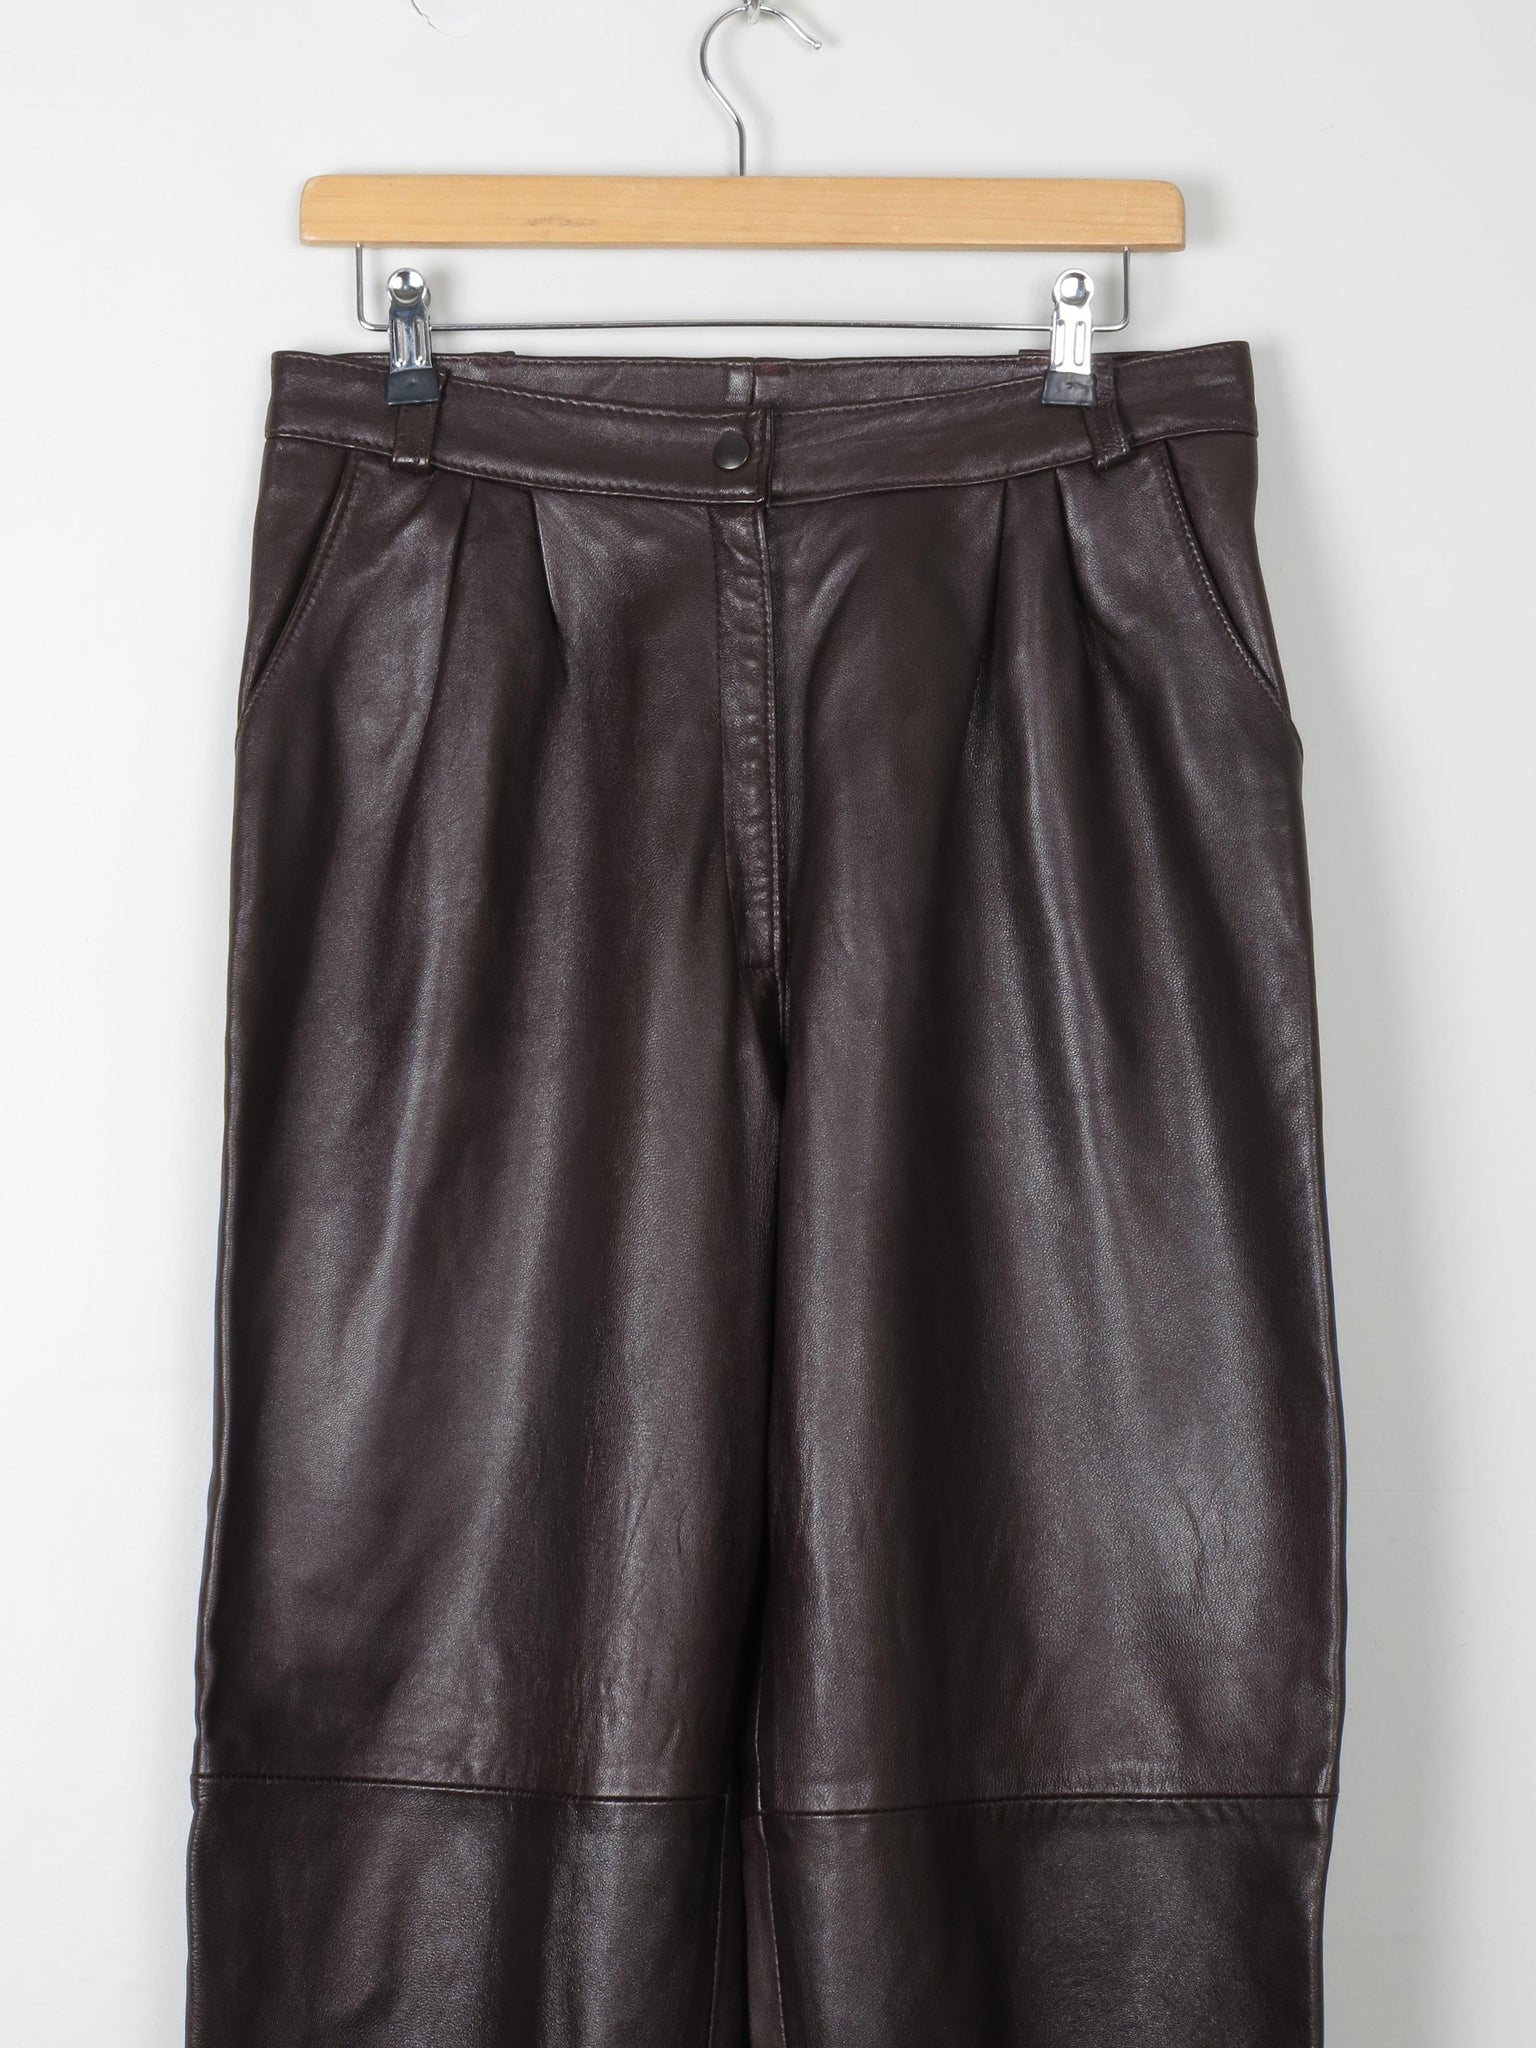 Women's Chocolate Brown Leather Vintage Trousers 31" 12 - The Harlequin